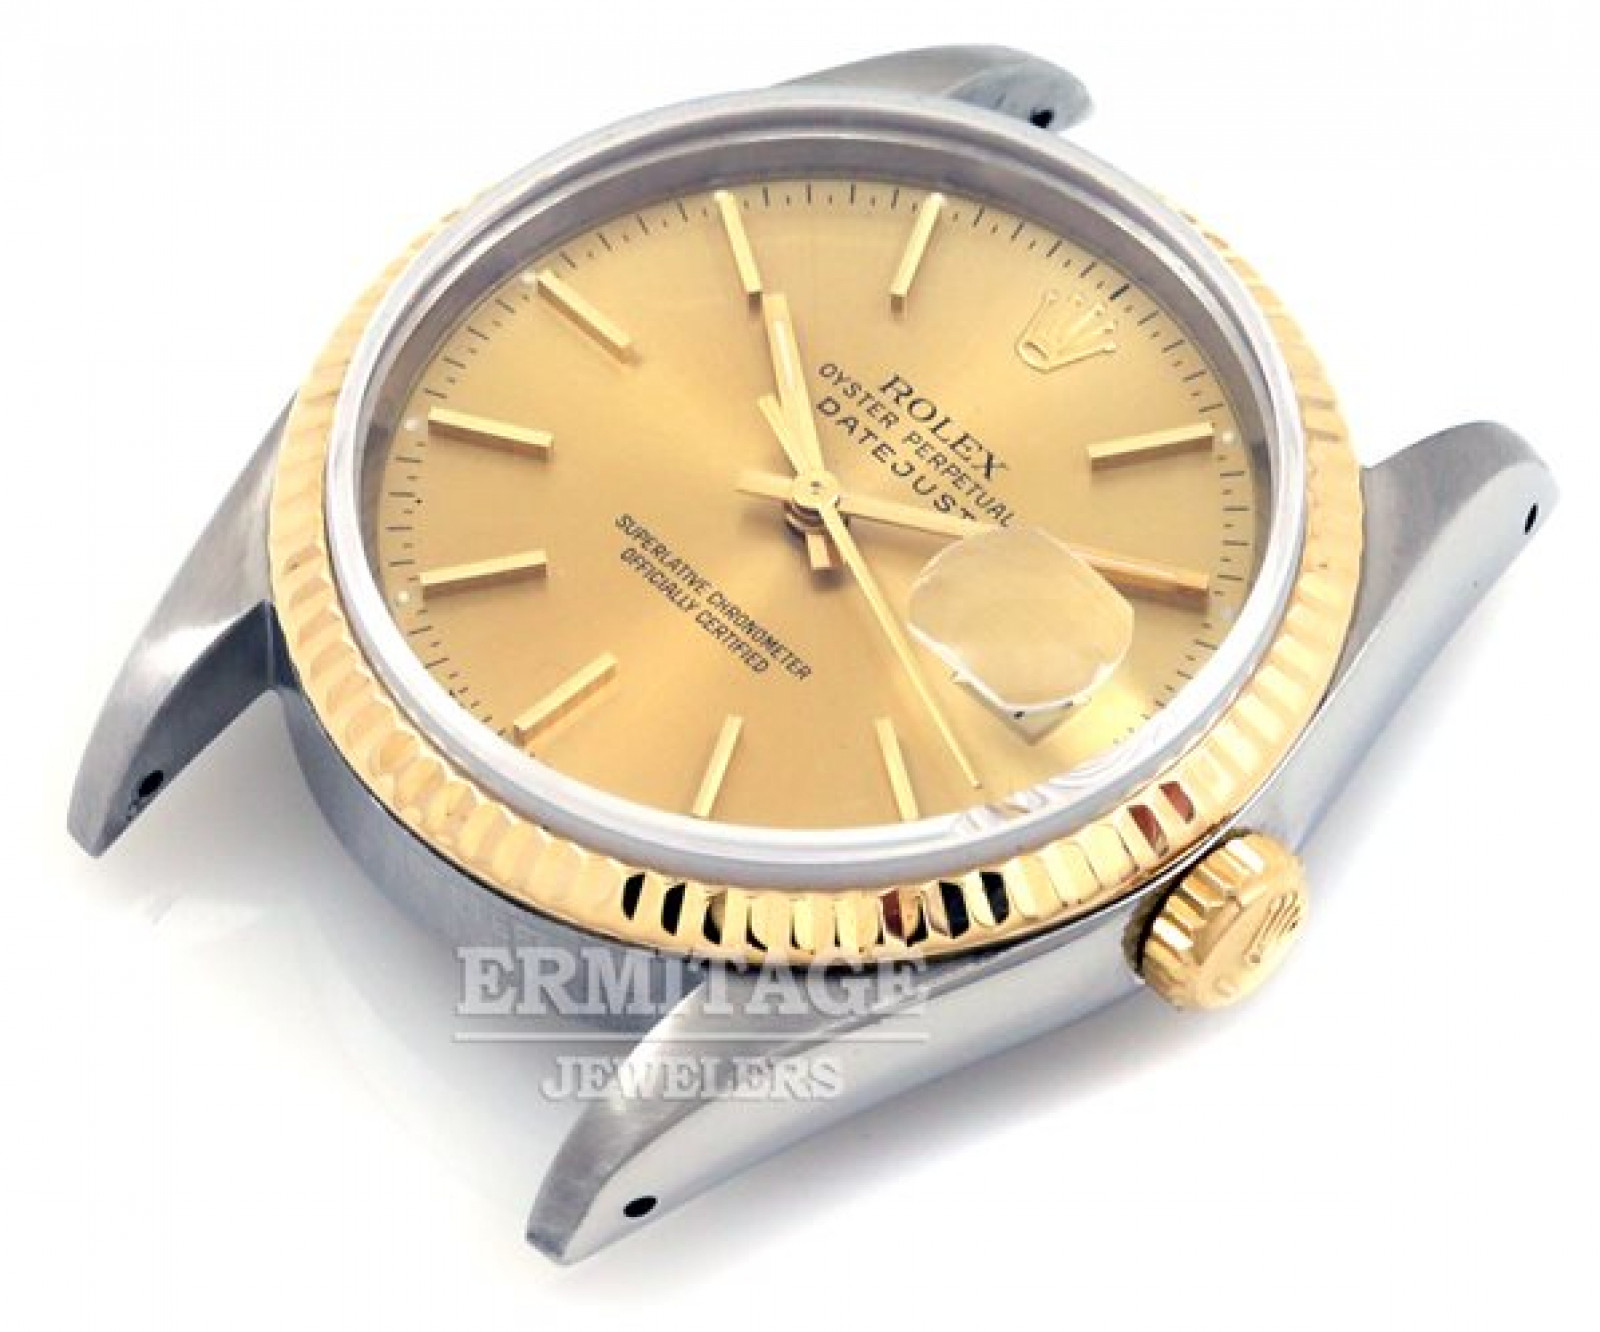 Find Out Your Price for Used Rolex Datejust 16233